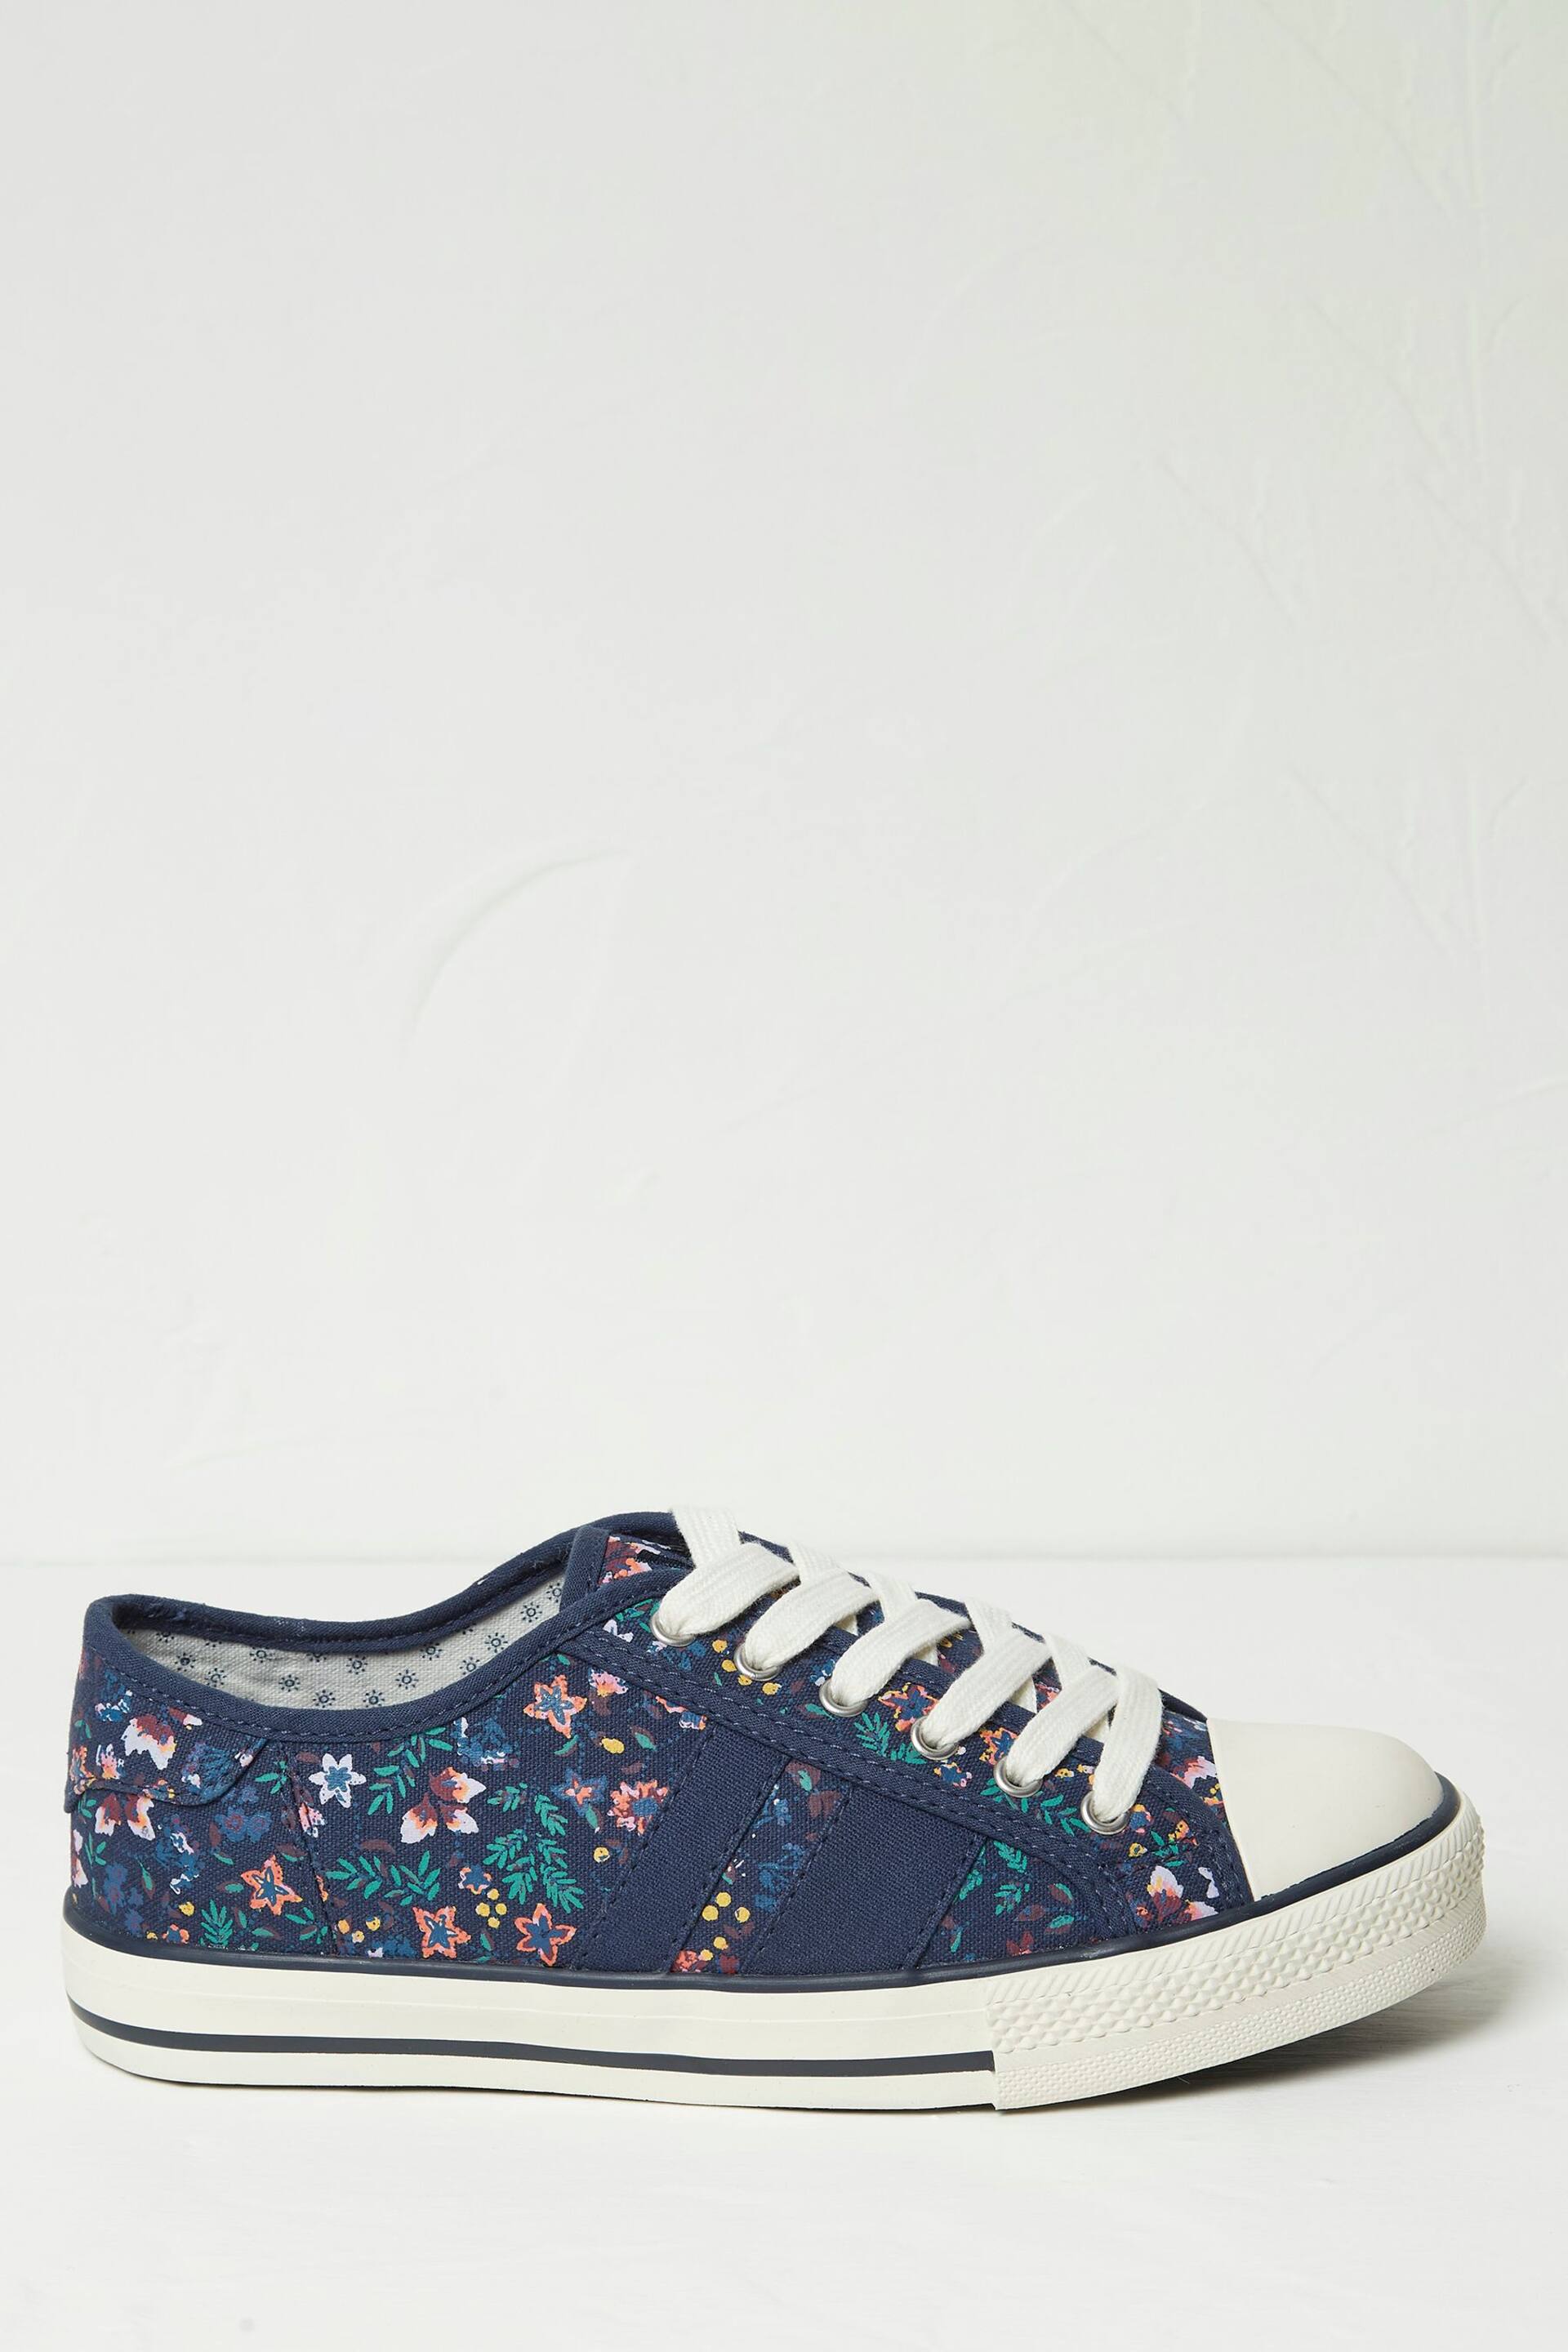 FatFace Blue Raya Canvas Lace Up Trainers - Image 1 of 3